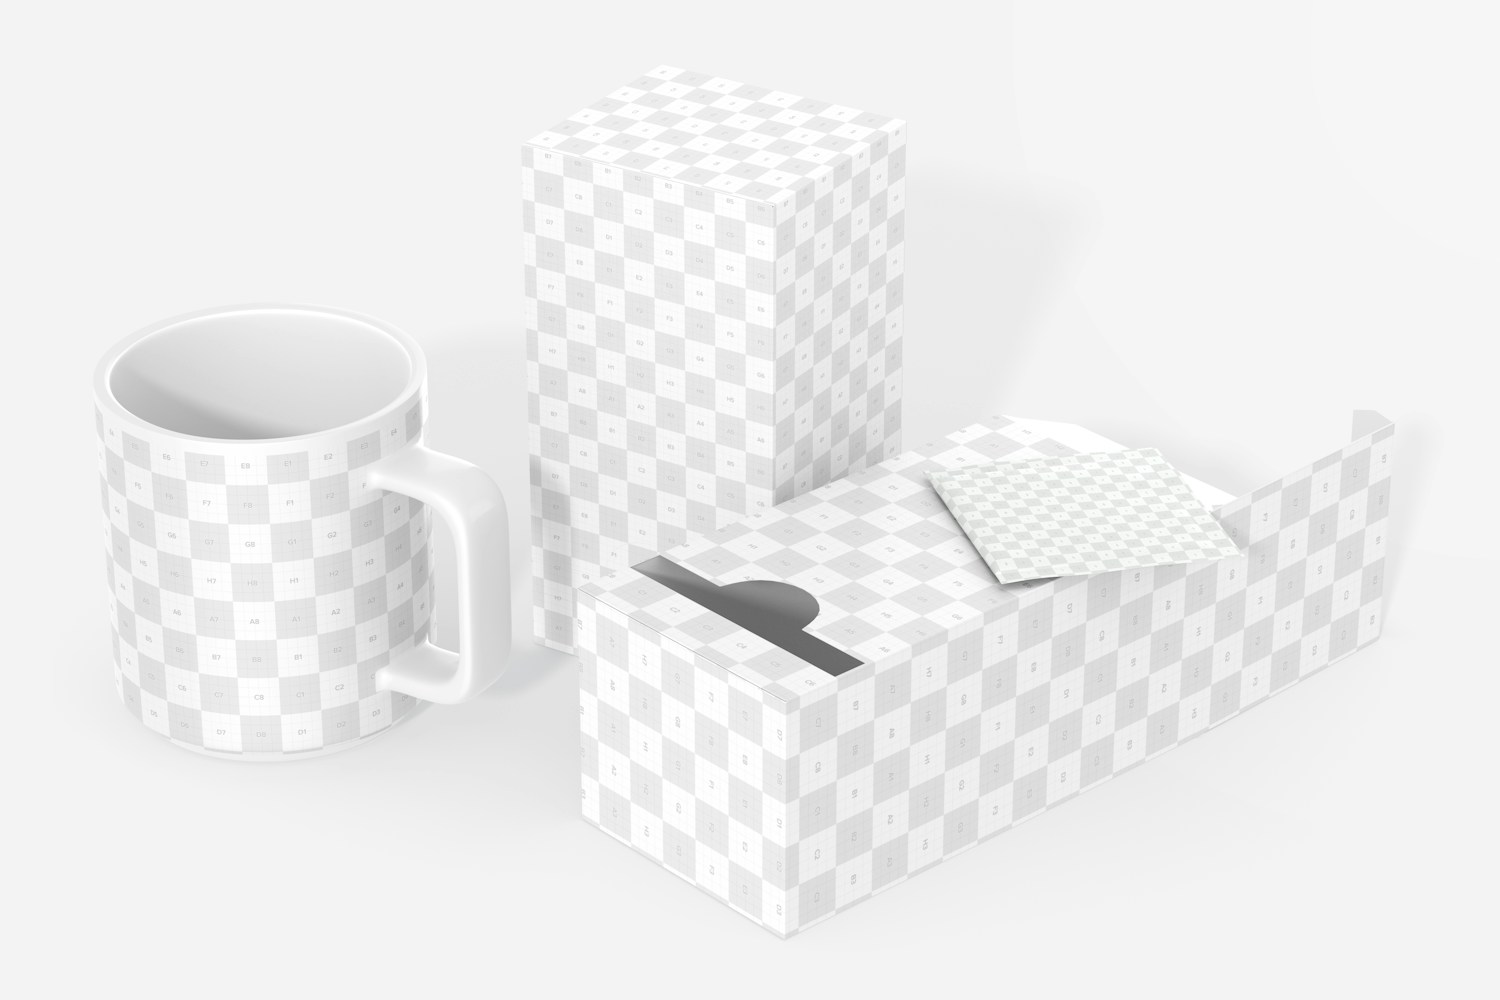 Tea Dispenser Box Mockup, Standing and Dropped